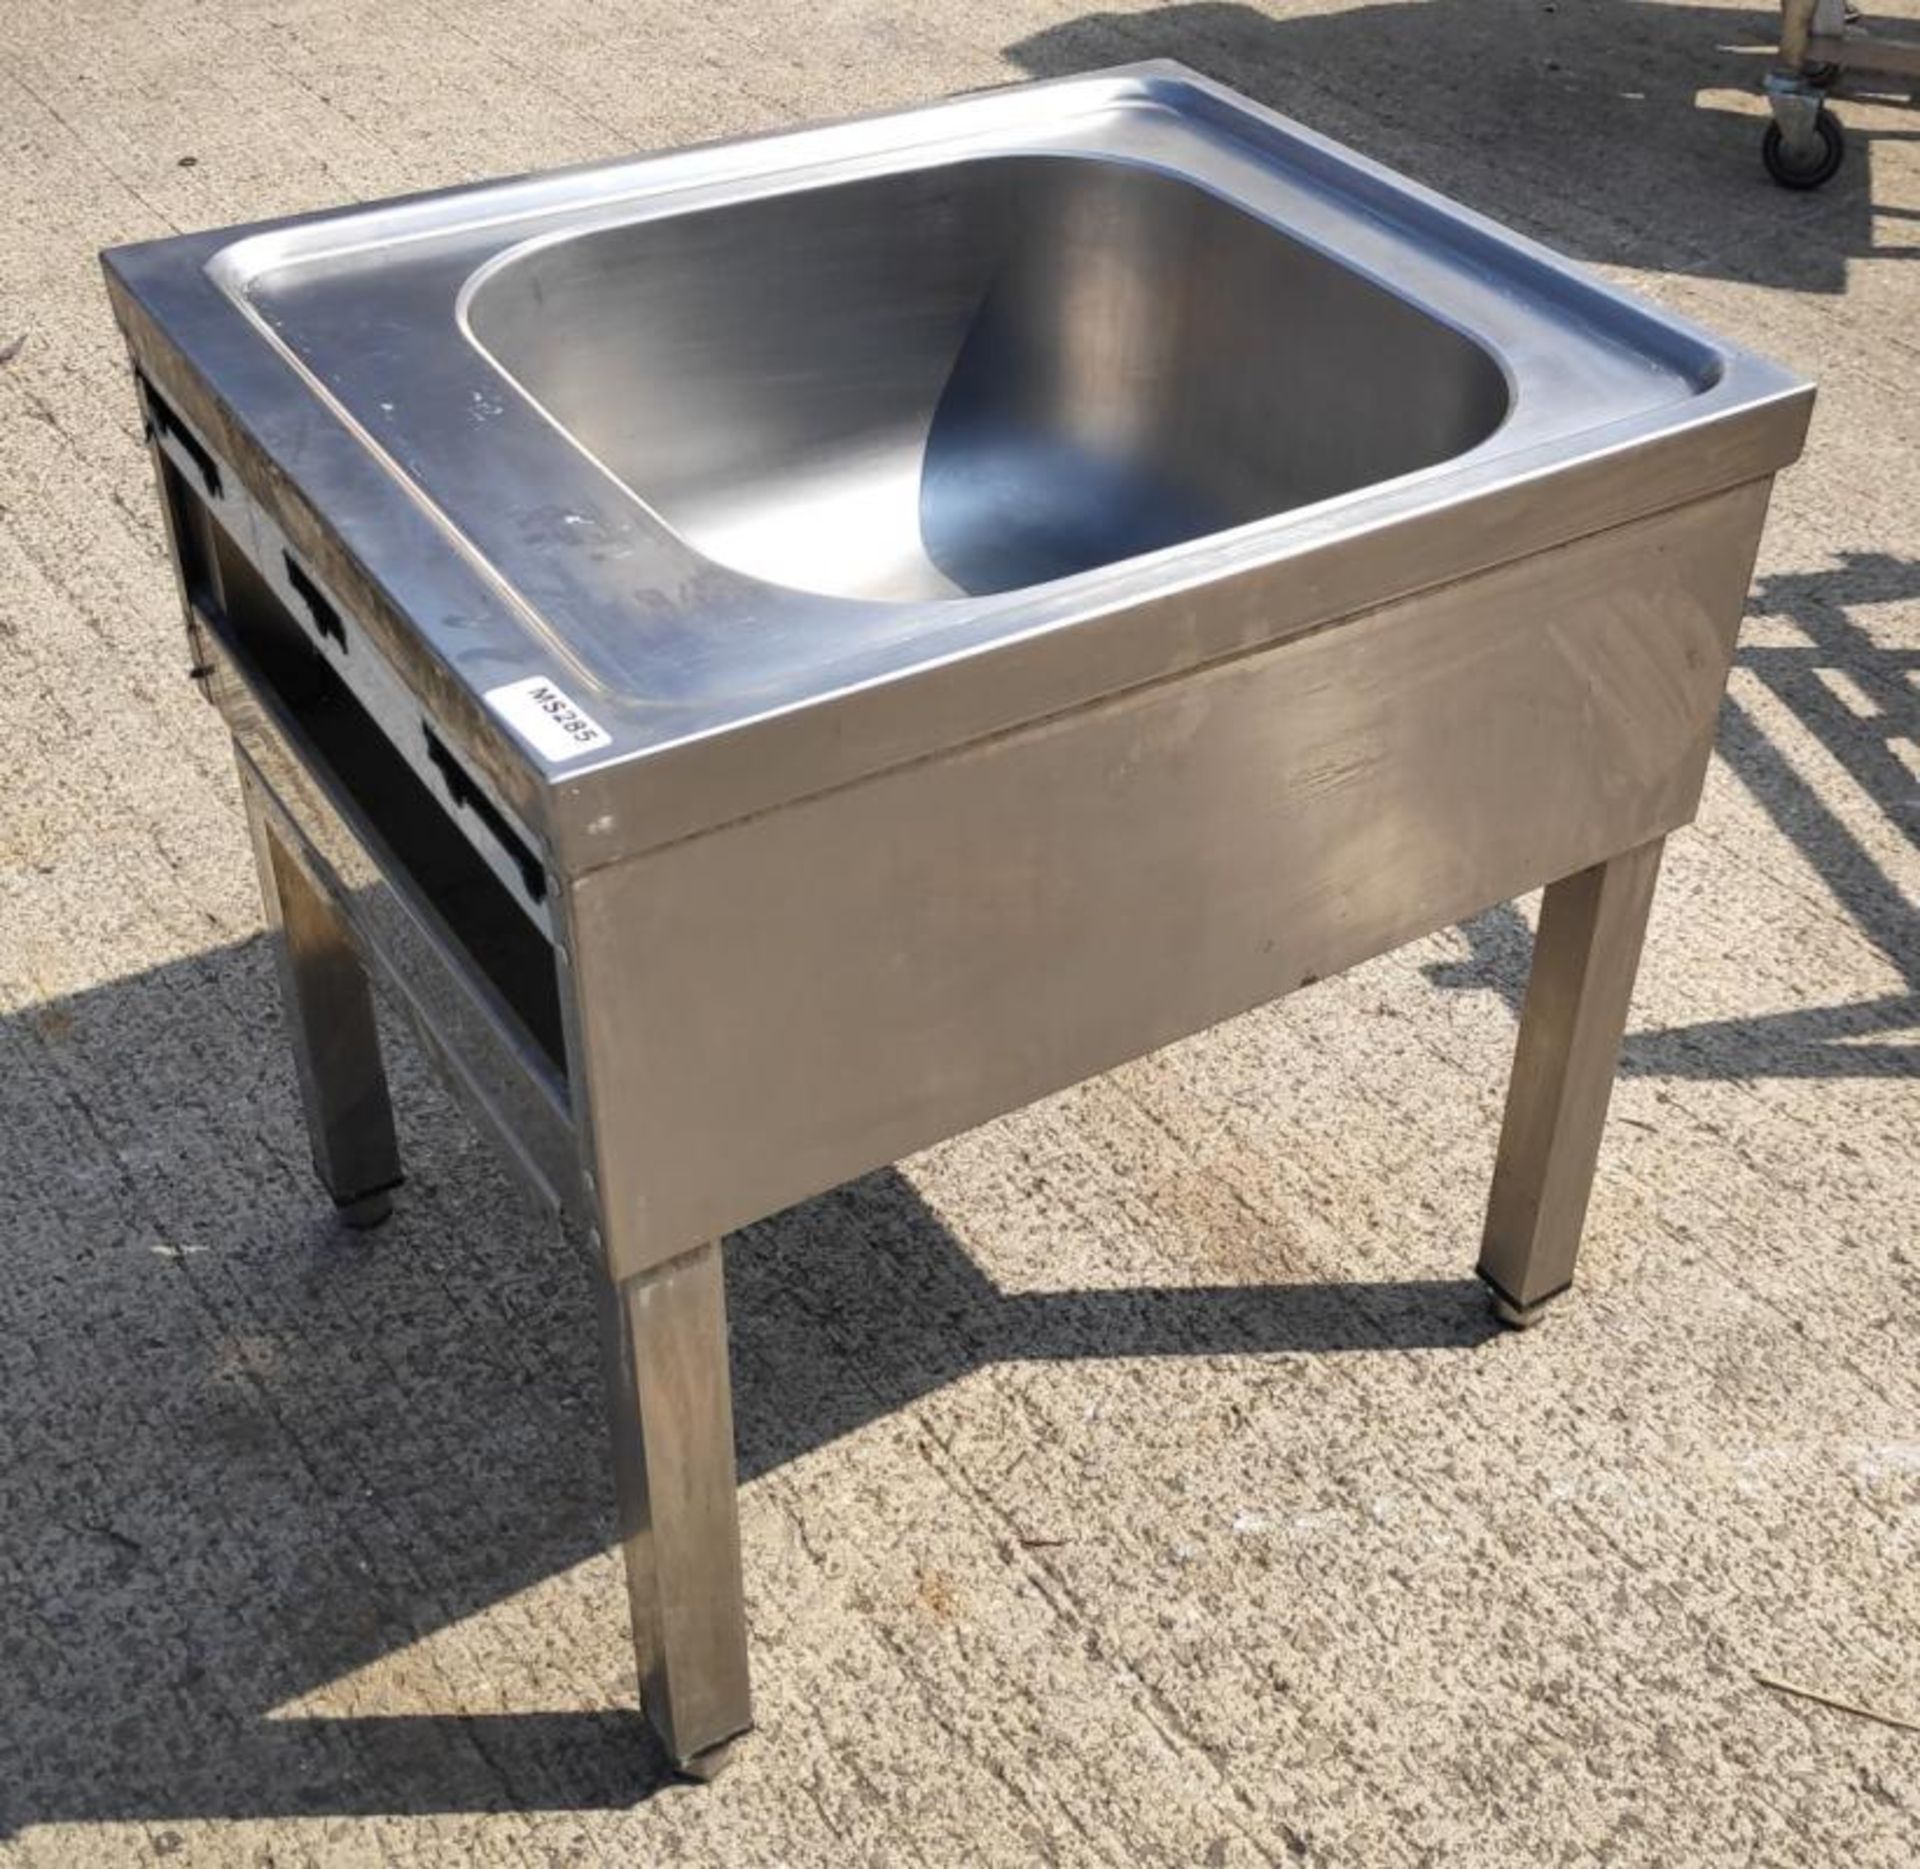 1 x Low Stainless Steel Commercial Kitchen Sink Unit - Dimensions: 50W x 60D x 60H cm - Very Recentl